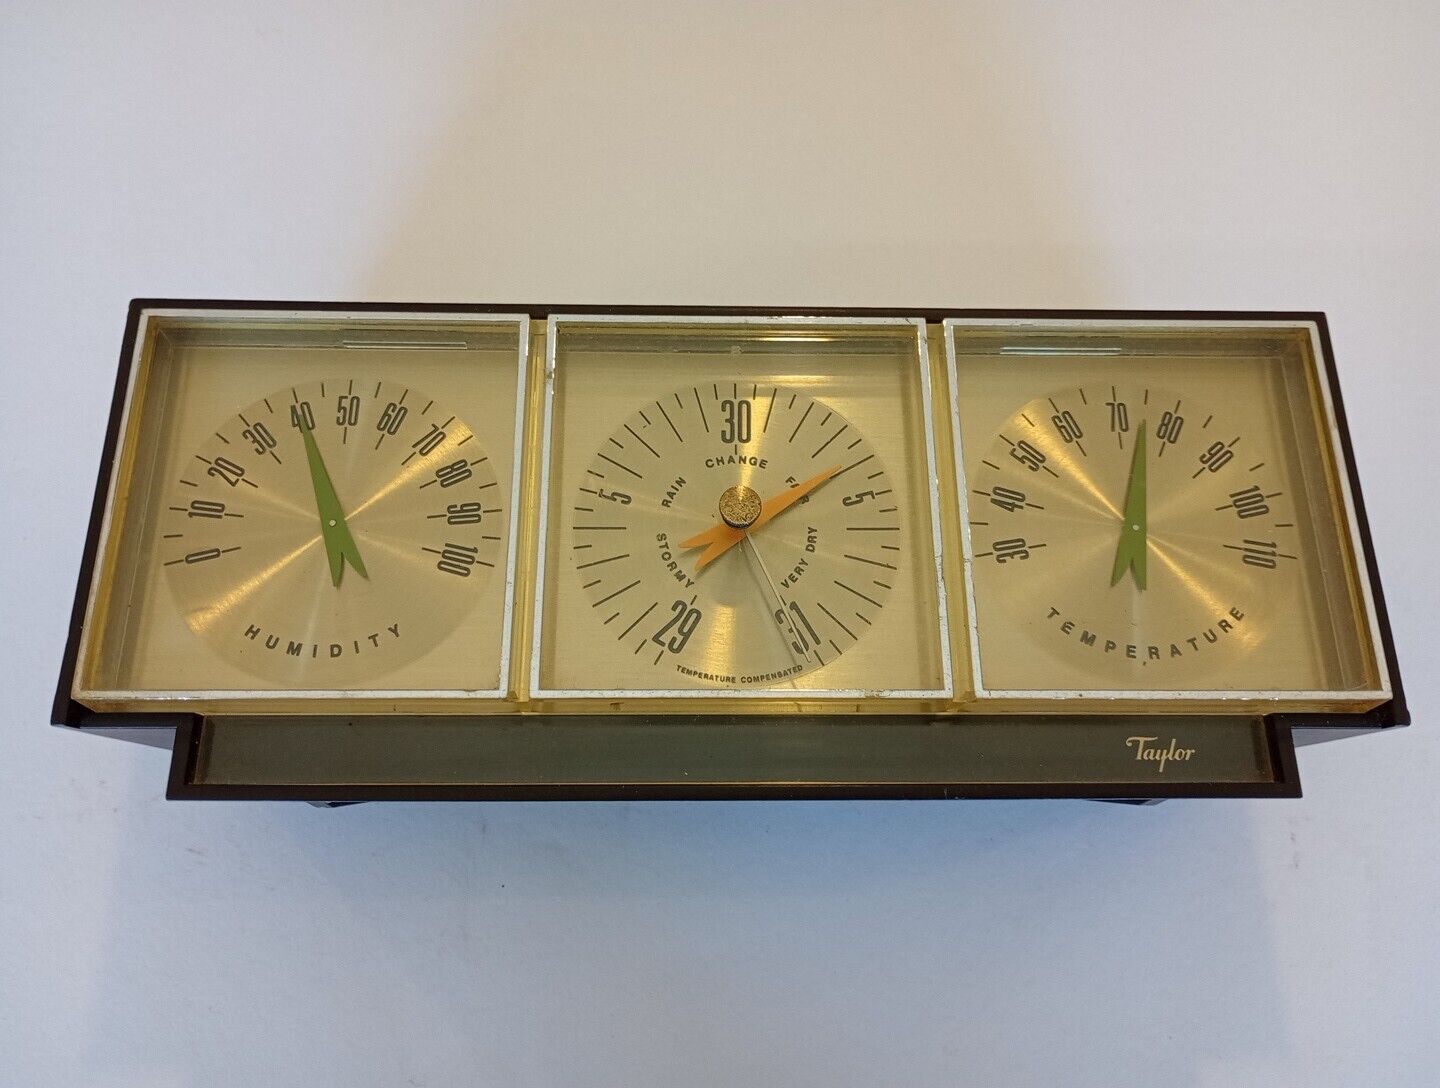 VINTAGE TAYLOR INSTRUMENT WEATHER STATION TEMPERATURE / HUMIDITY BAROMETER